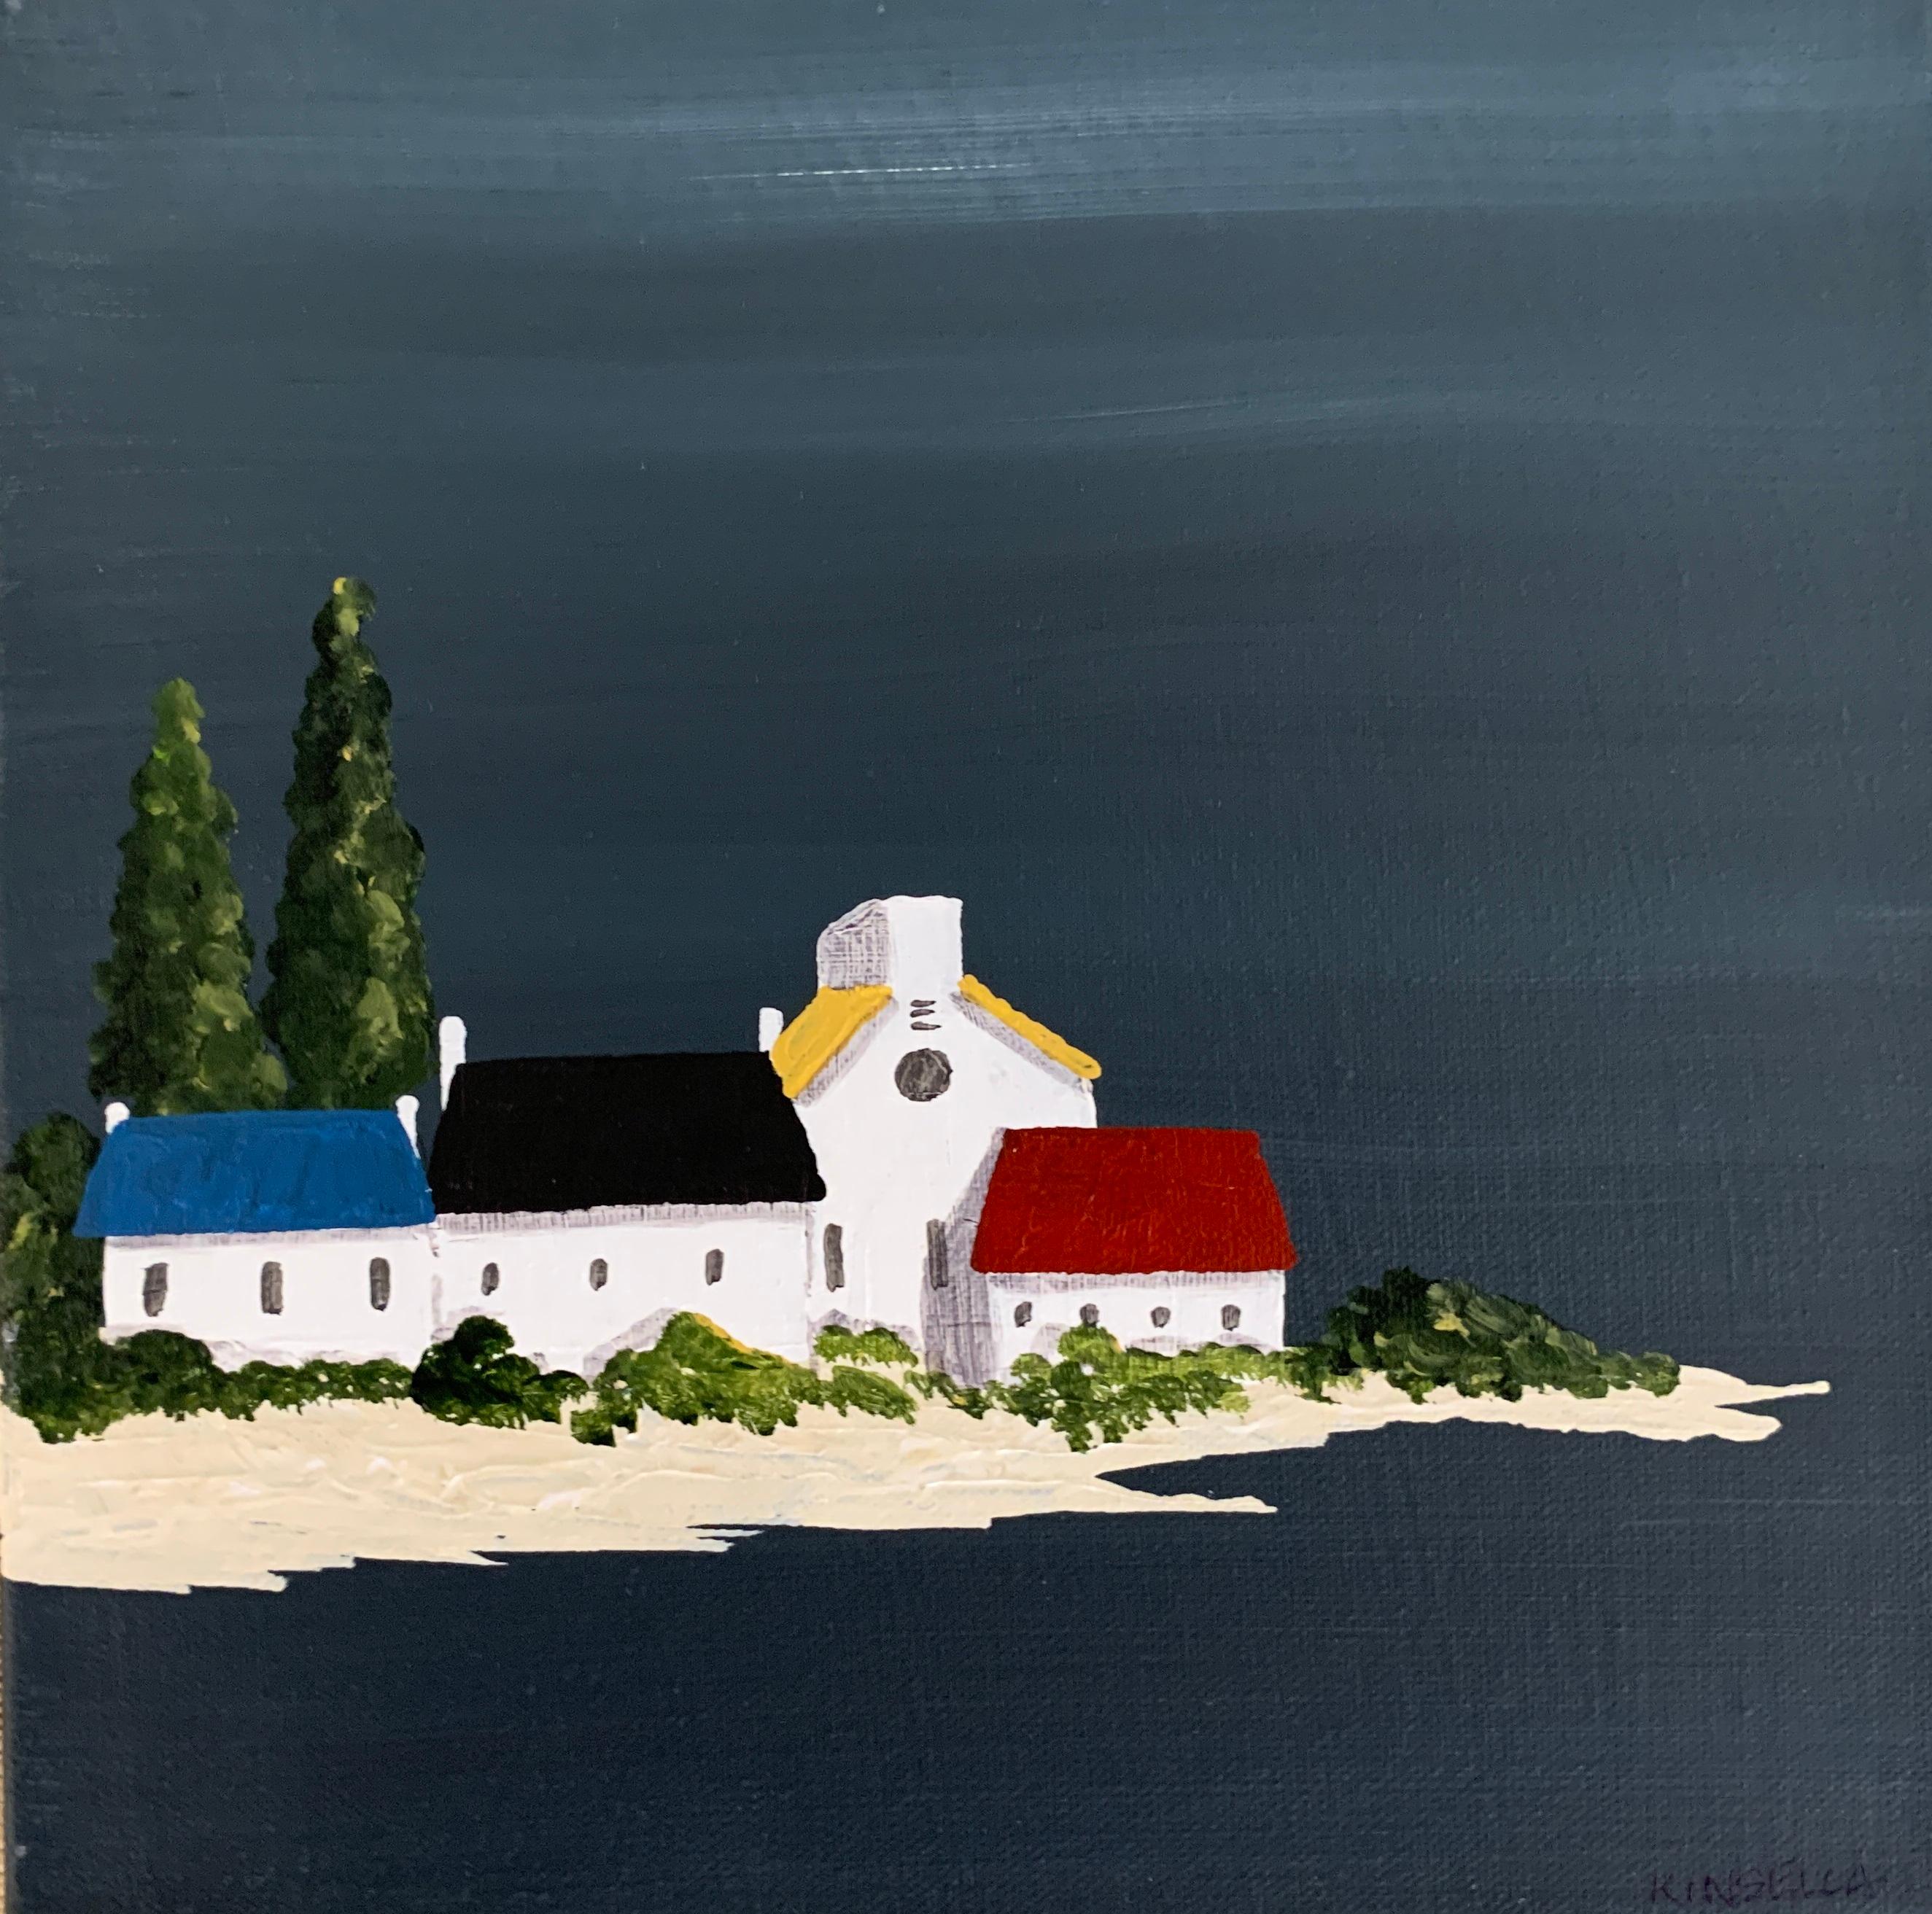 'Village XI' is a small contemporary acrylic on canvas coastal painting of square format, created by American artist Susan Kinsella in 2019. Featuring a strong palette made of dark blue grey, black, white and beige colors accented with touches of